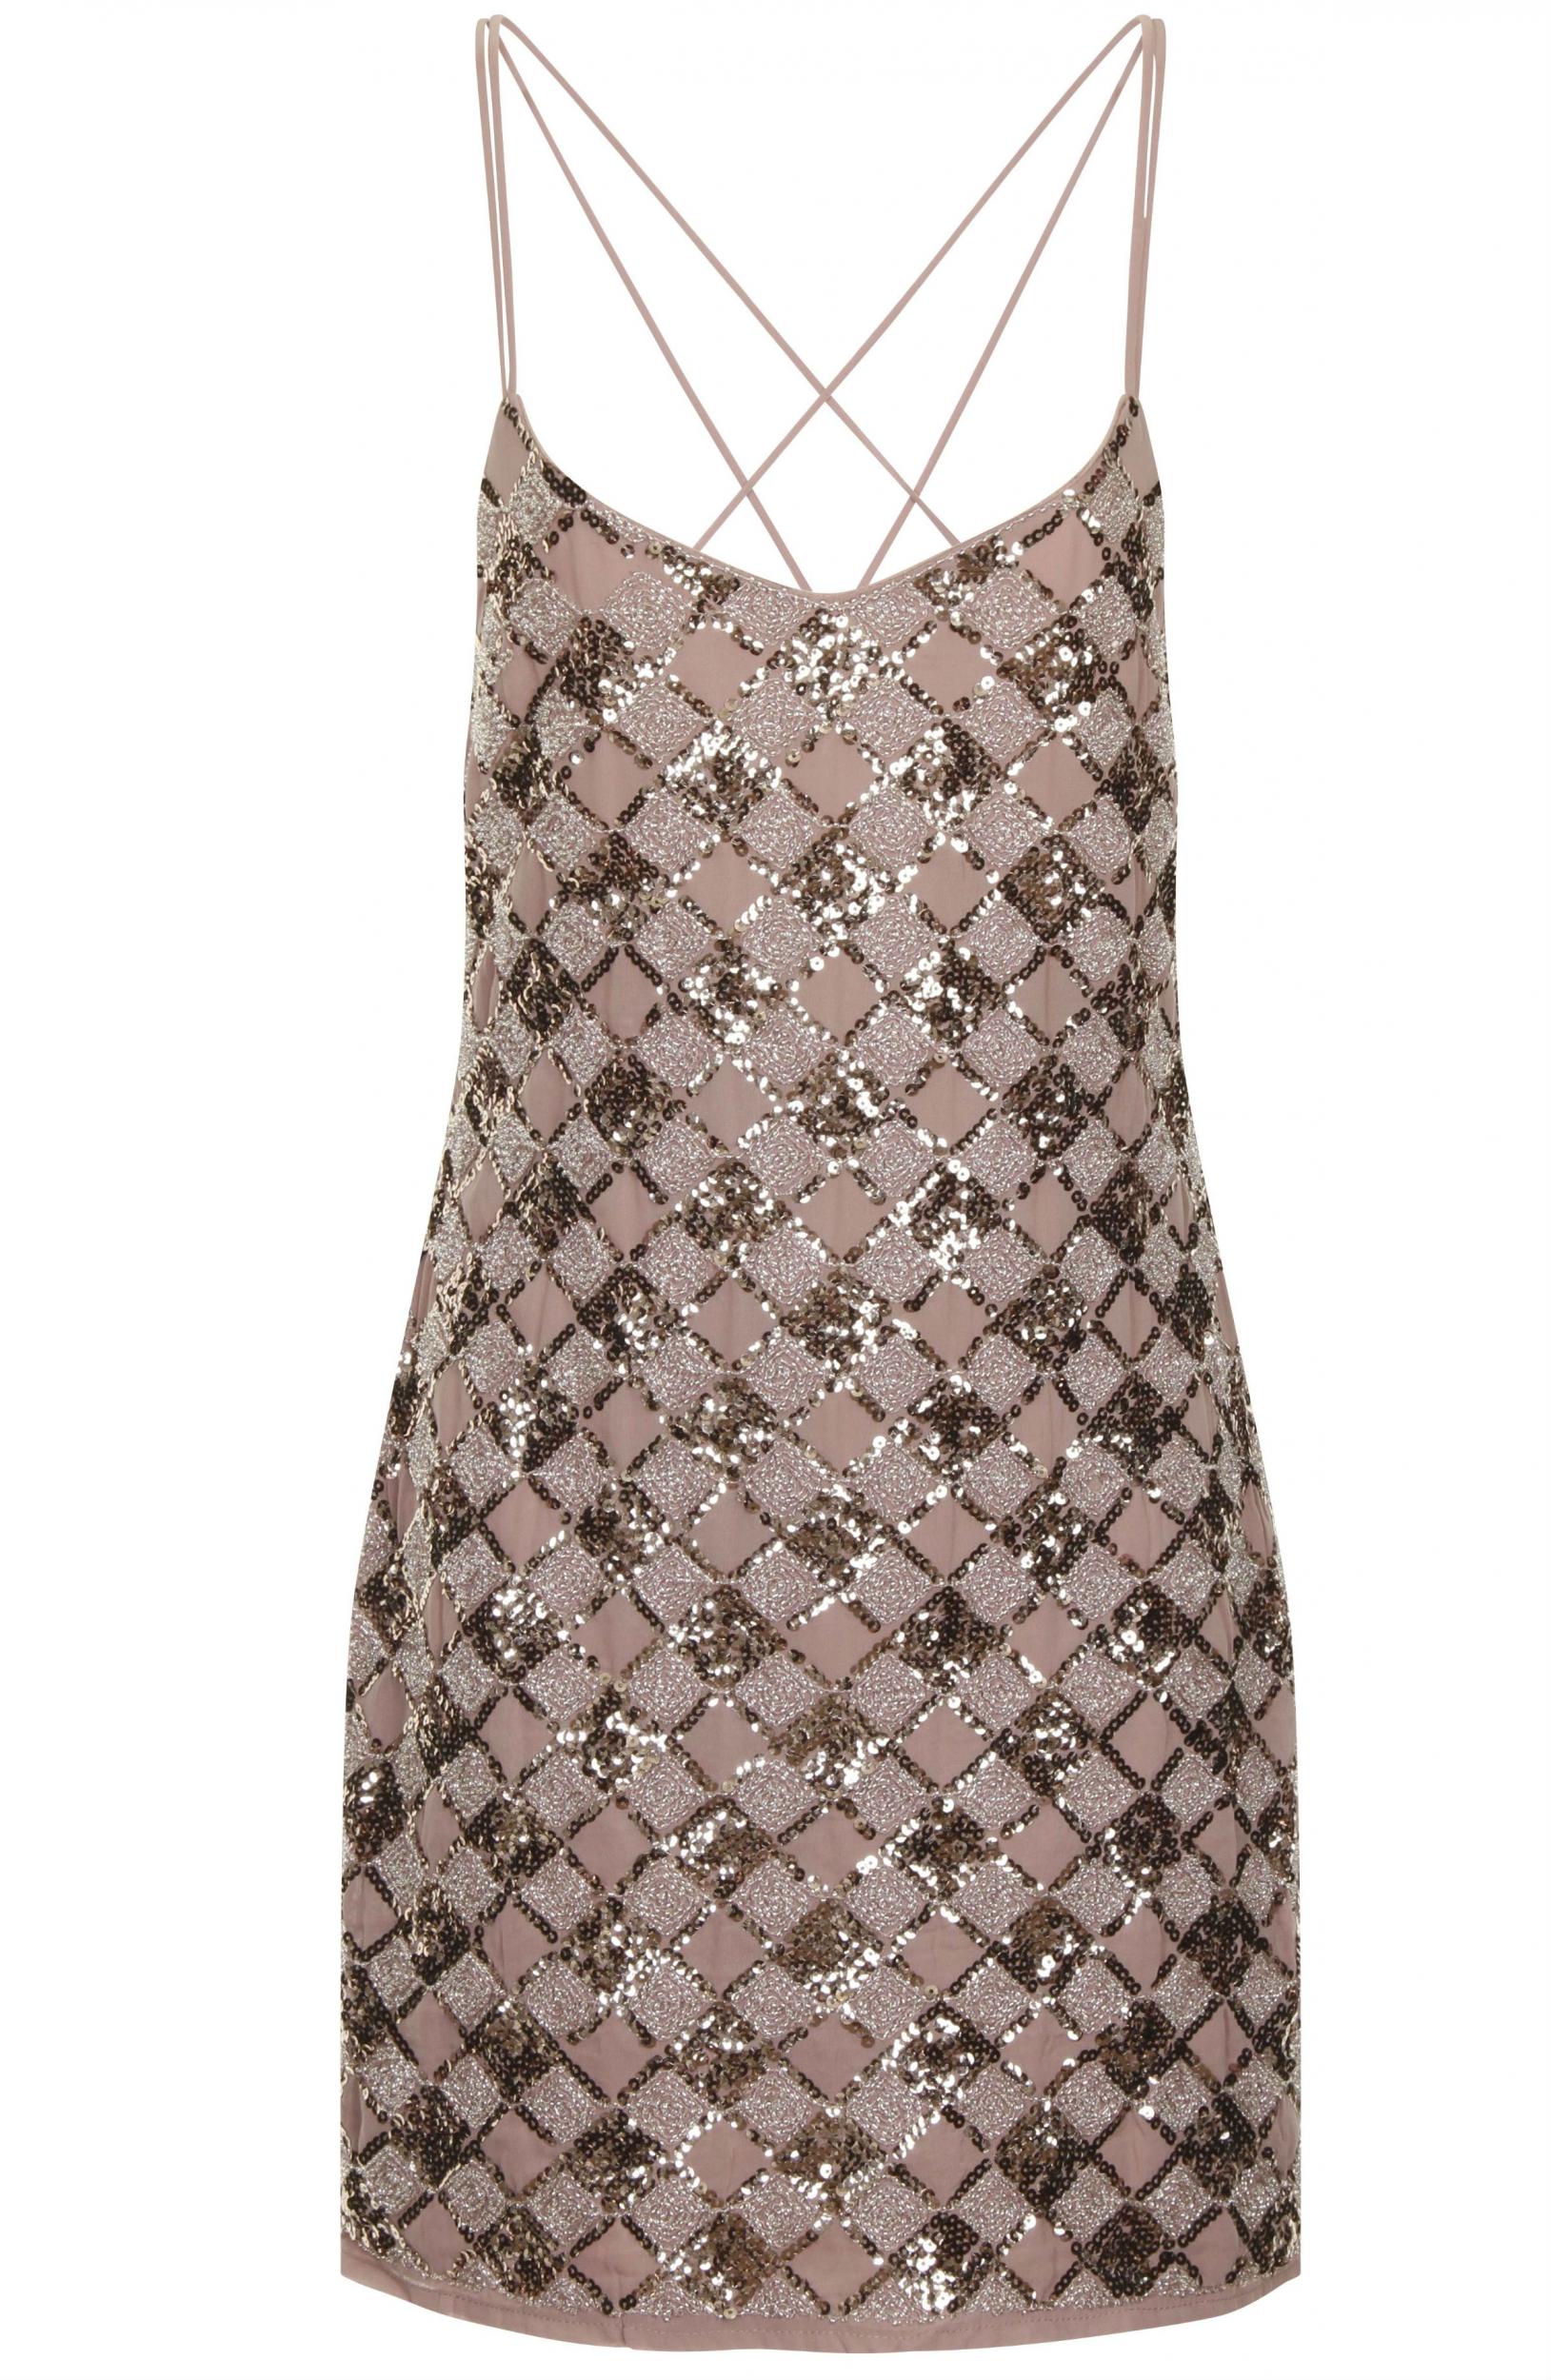 ChiChi London's Sequin Pink Dress will be reduced from £59.99 to £45